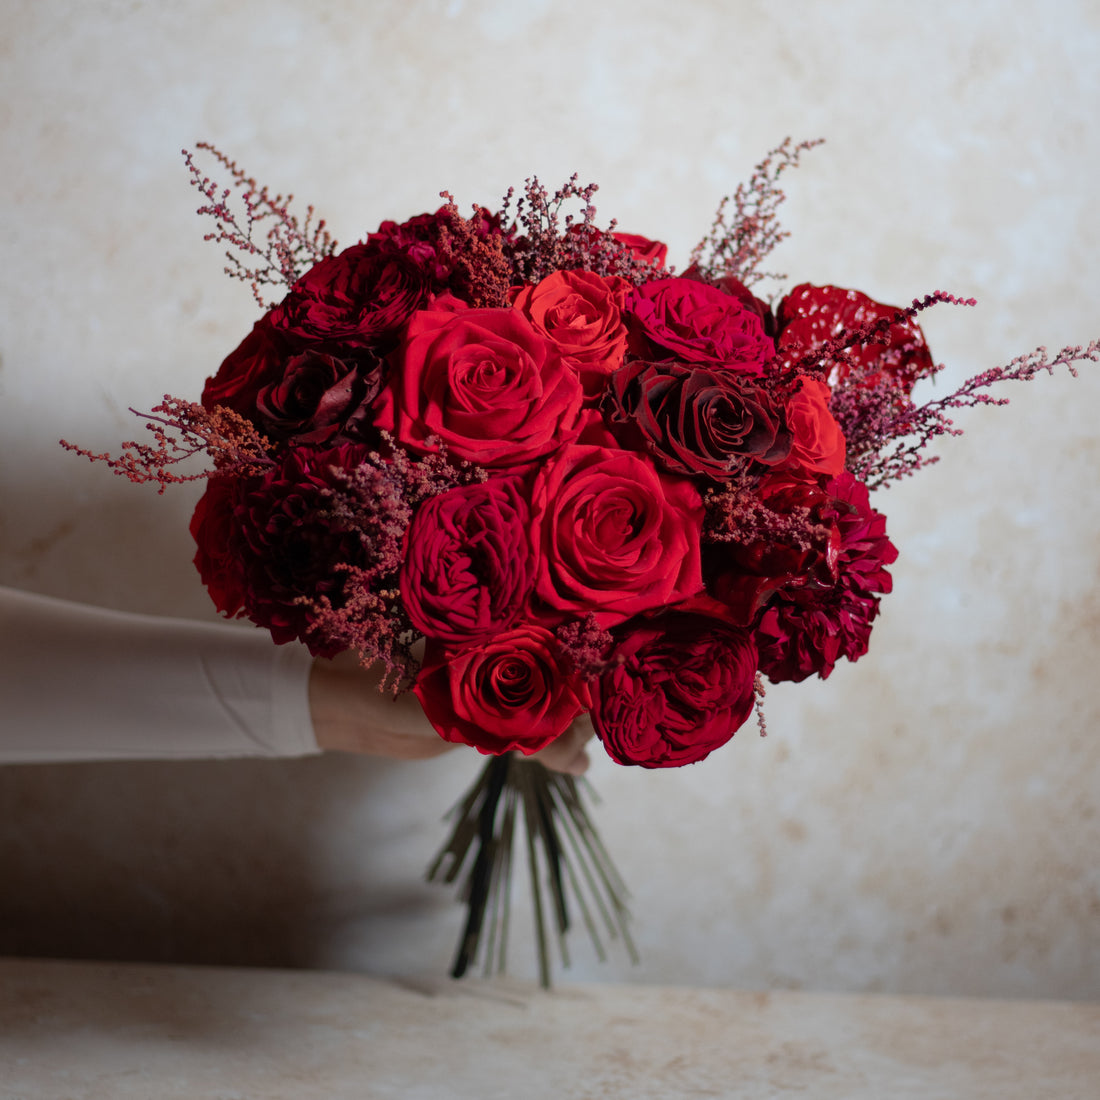 Why Roses Are the Perfect Valentine's Day Gift?